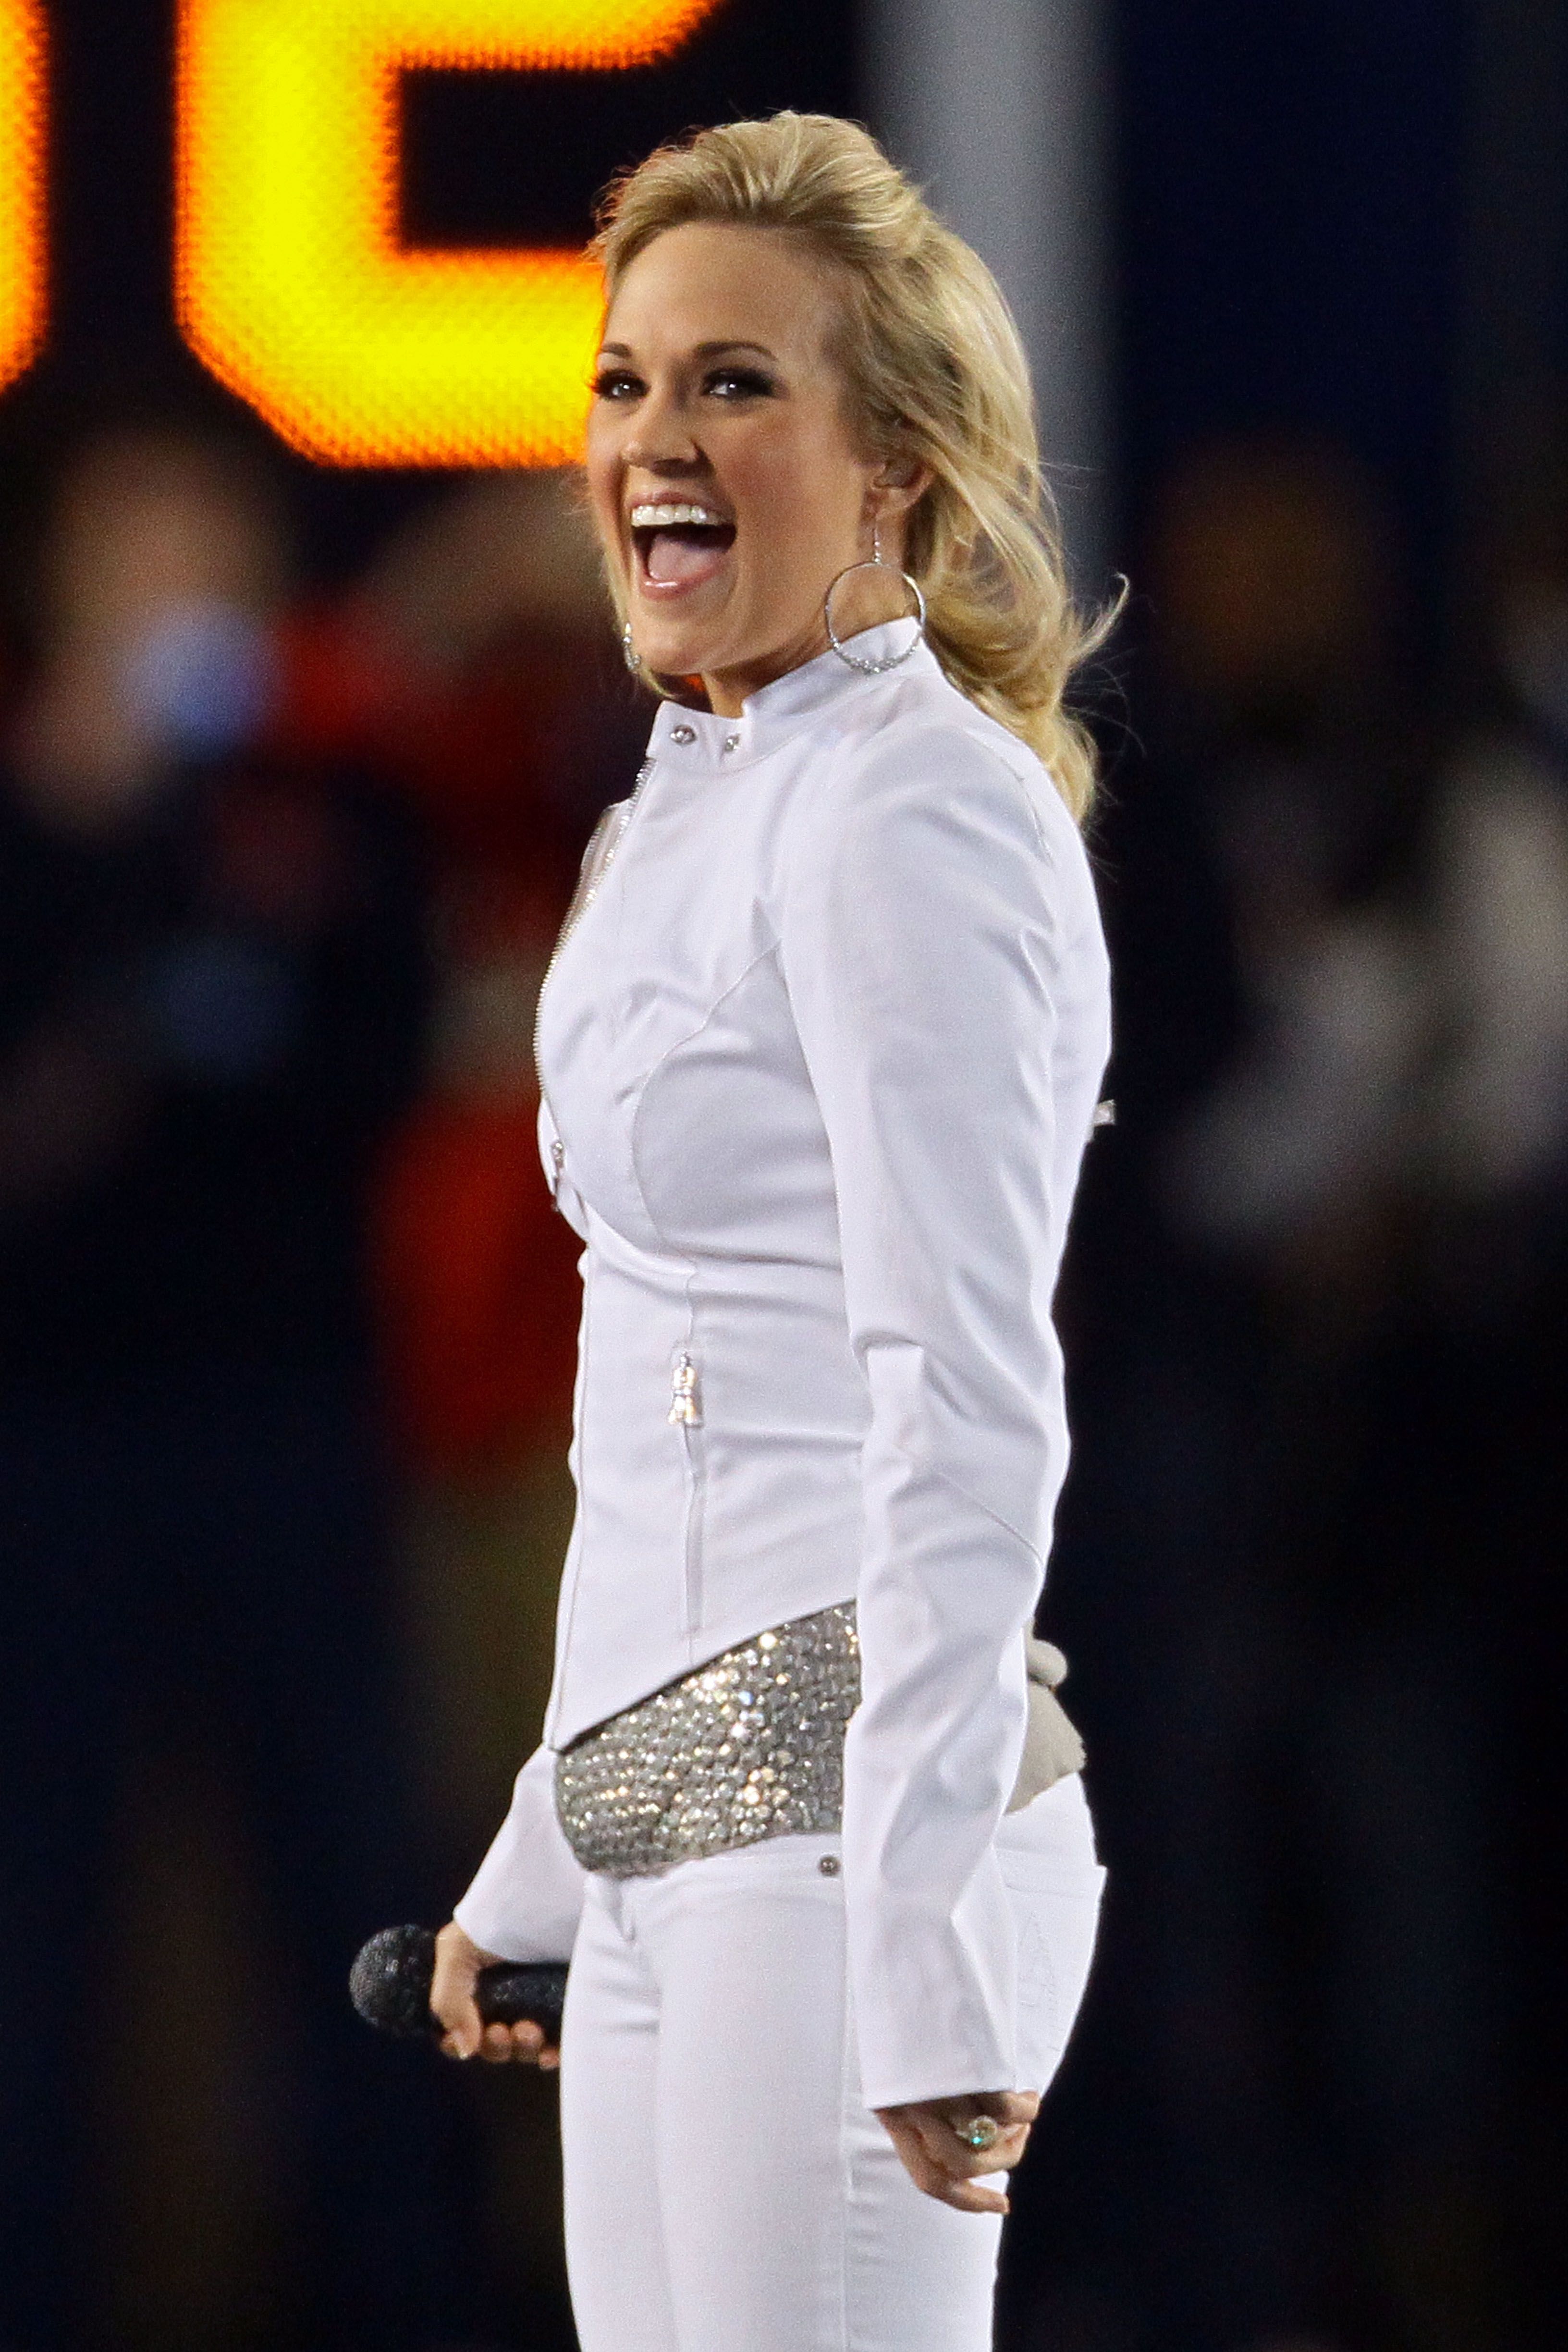 Carrie Underwood during the pregame of Super Bowl XLIV between the Indianapolis Colts and the New Orleans Saints on February 7, 2010 at Sun Life Stadium in Miami Gardens, Florida. | Source: Getty Images